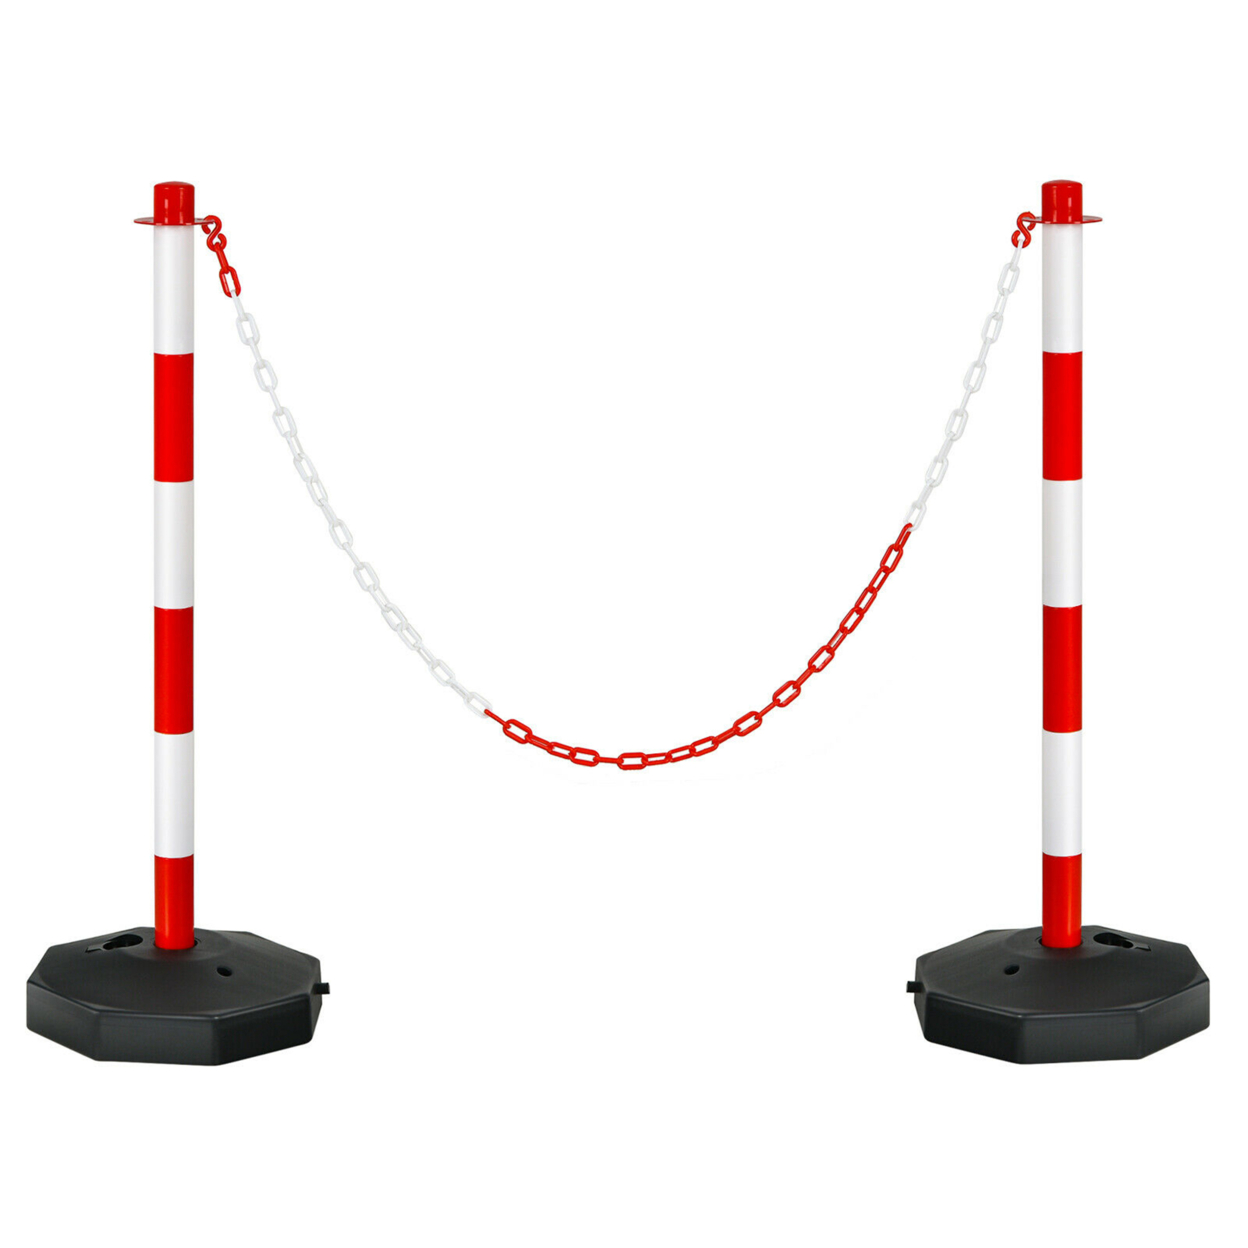 2PCS Traffic Delineator Pole Safety Caution Barrier W/ 5ft Link Chains - White & Red